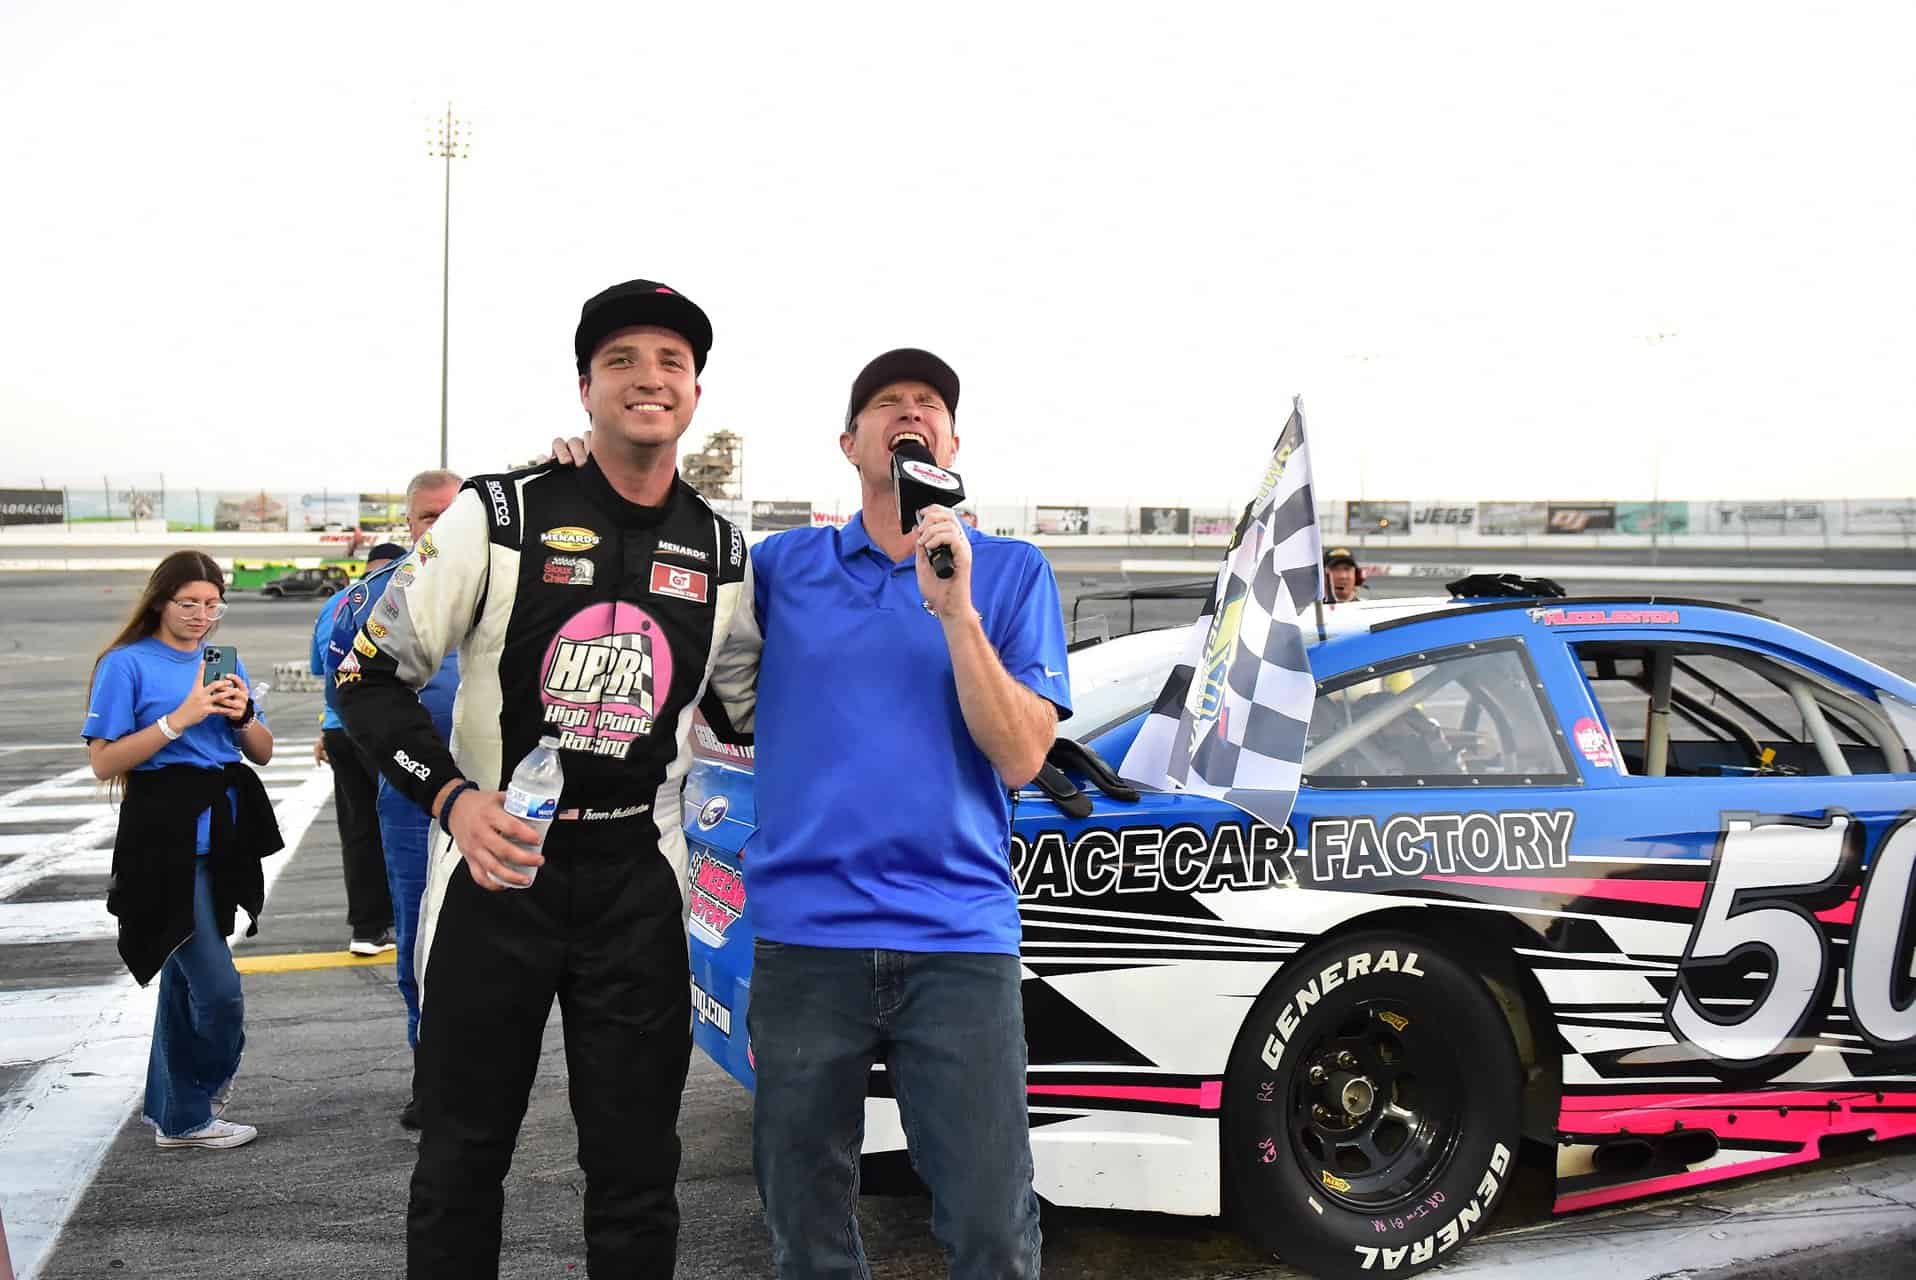 Vincent Delforge breaks down the analysis and reactions from the ARCA Menards Series West teams following Trevor Huddleston's Irwindale win.